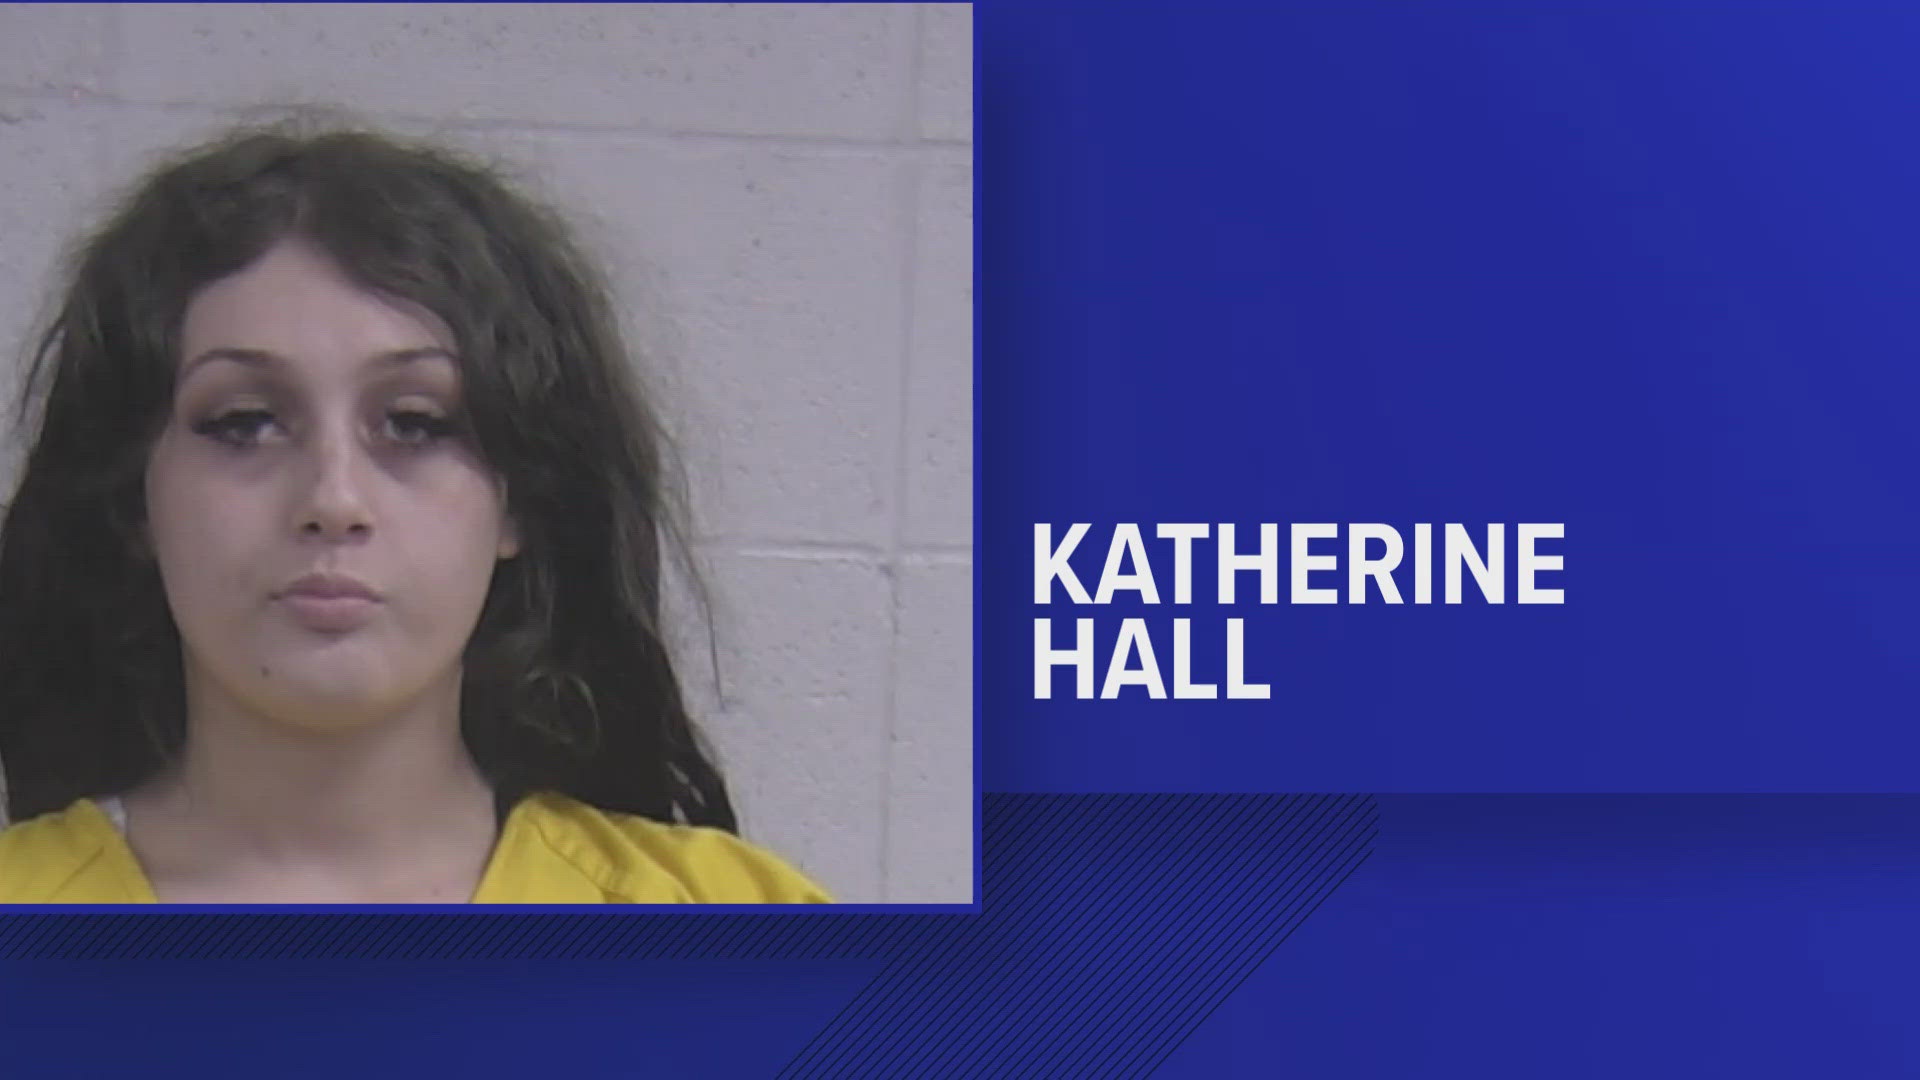 A 19-year-old has been charged after she hit a 7-year-old boy and a teenage girl who was trying to help the victim in the 3600 block of Parthenia Avenue.